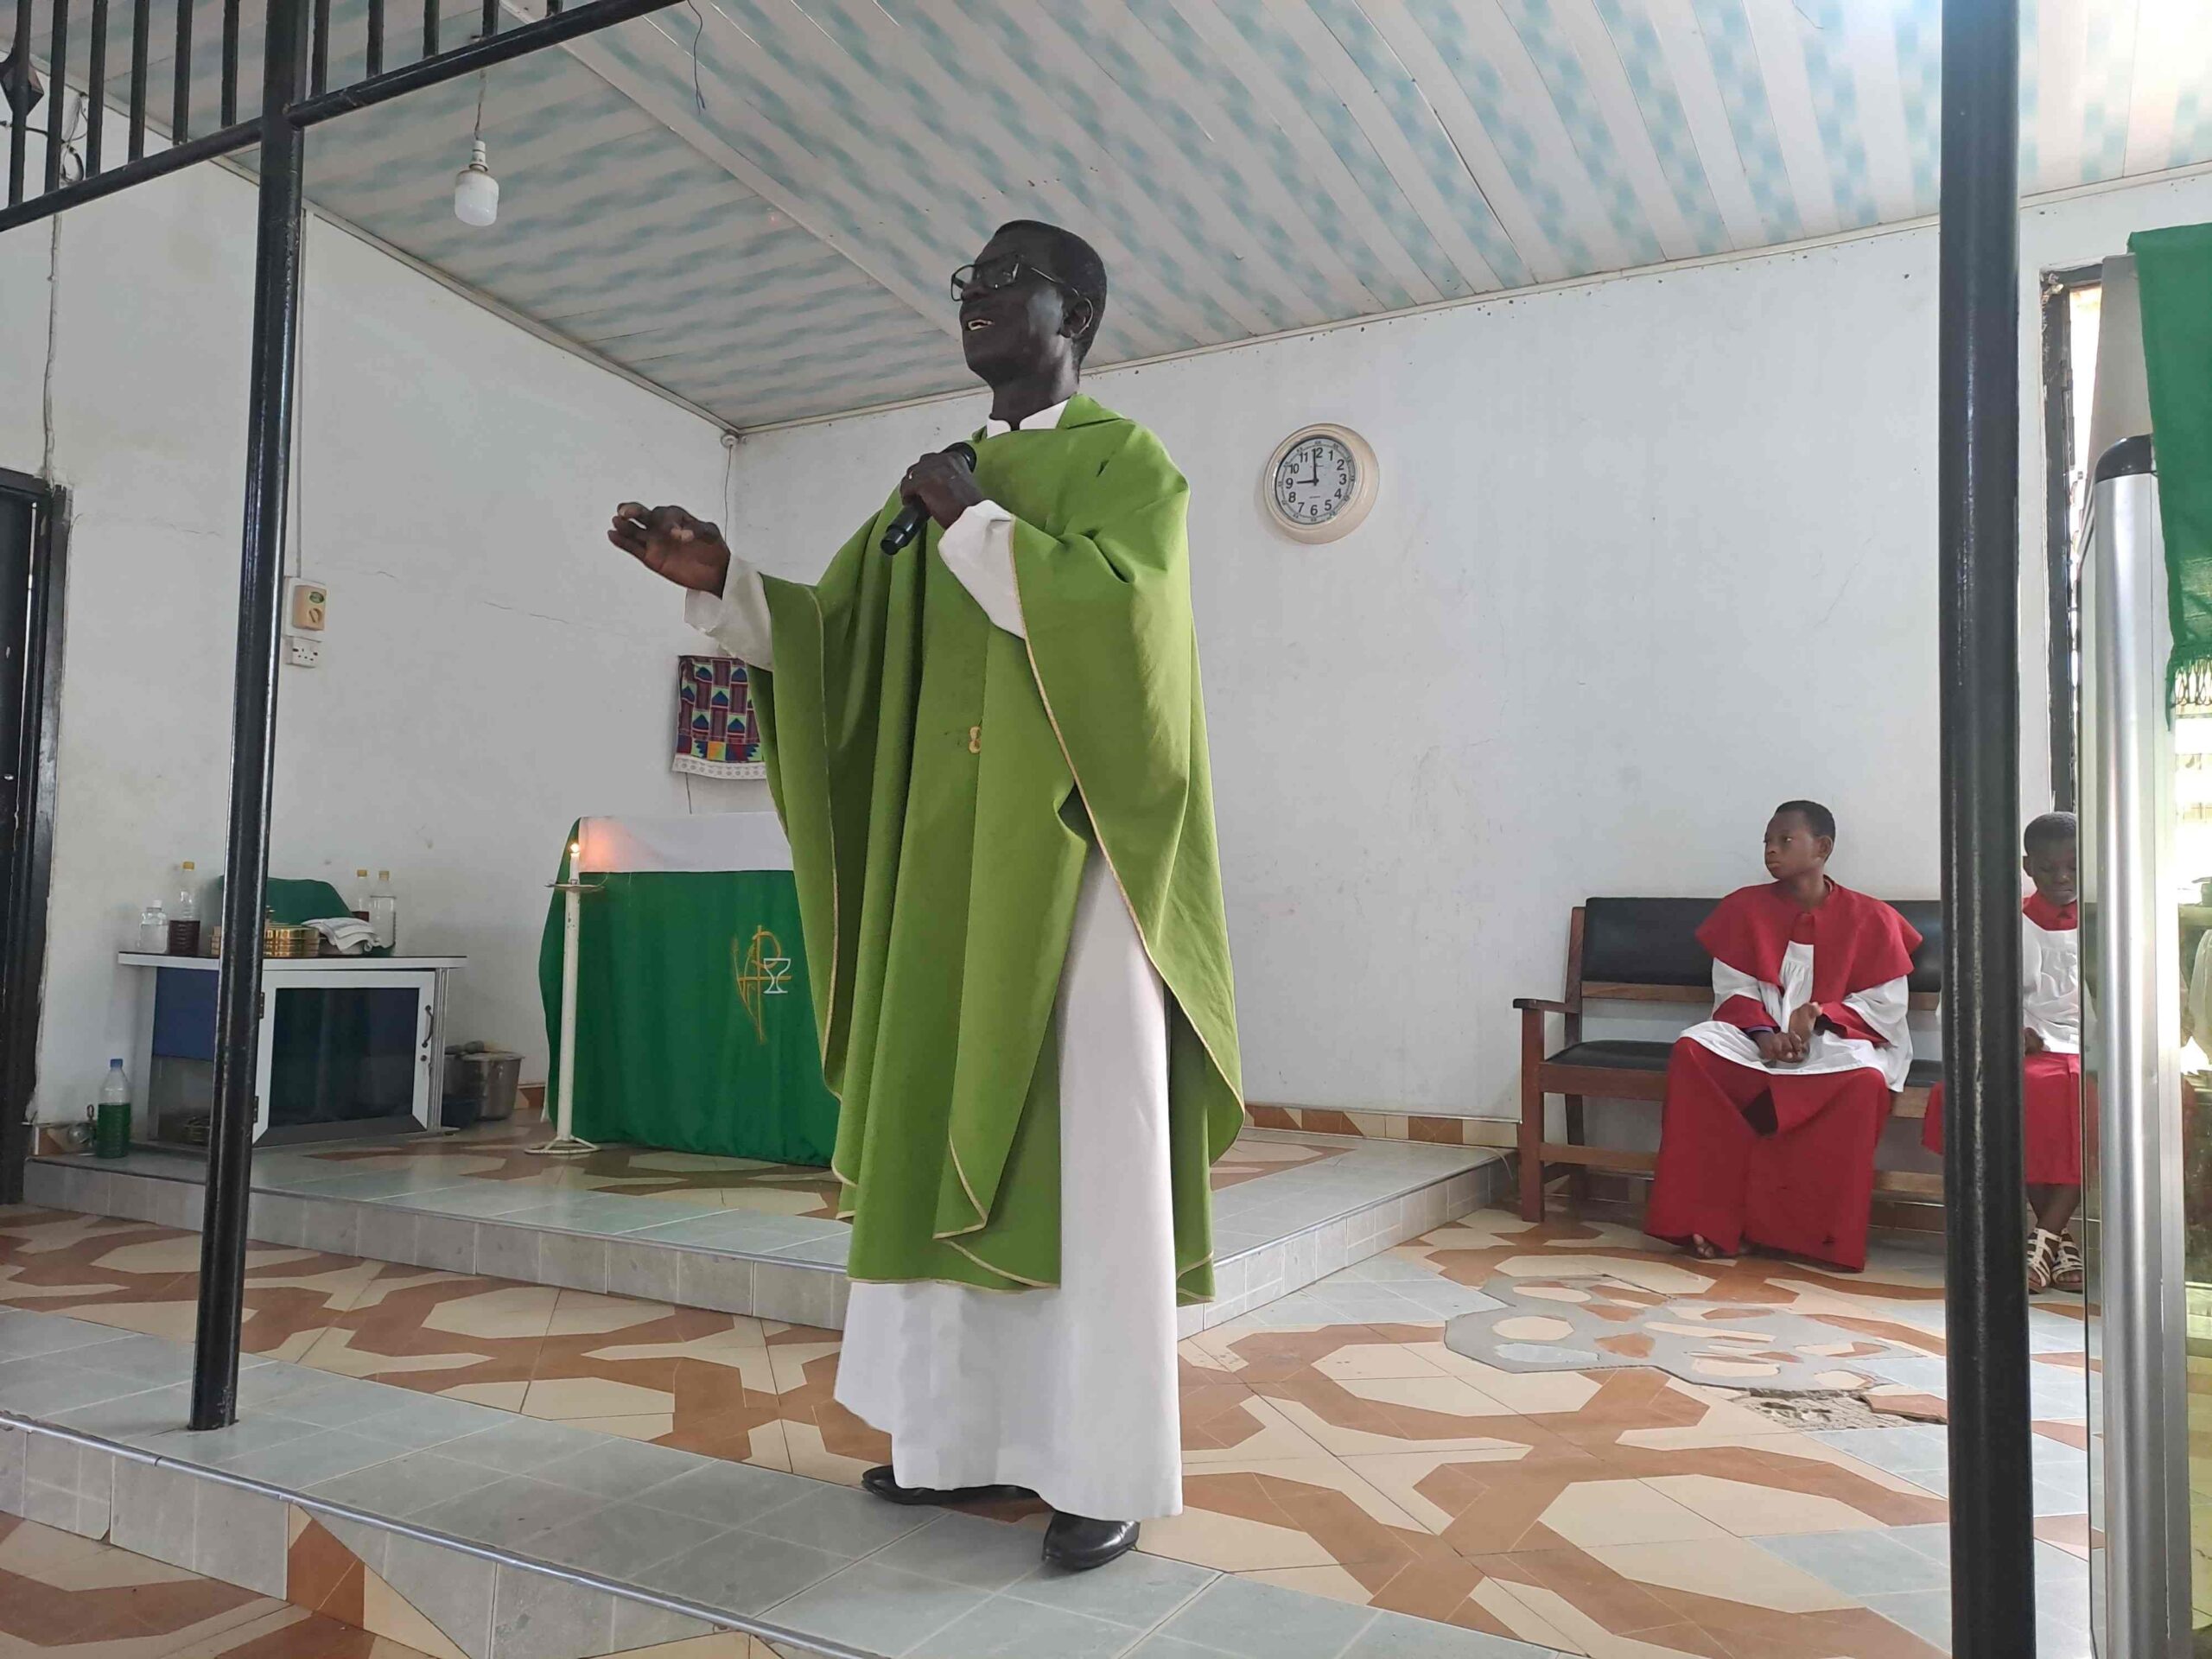 Anglican priest decries greed and negligence among people in leadership